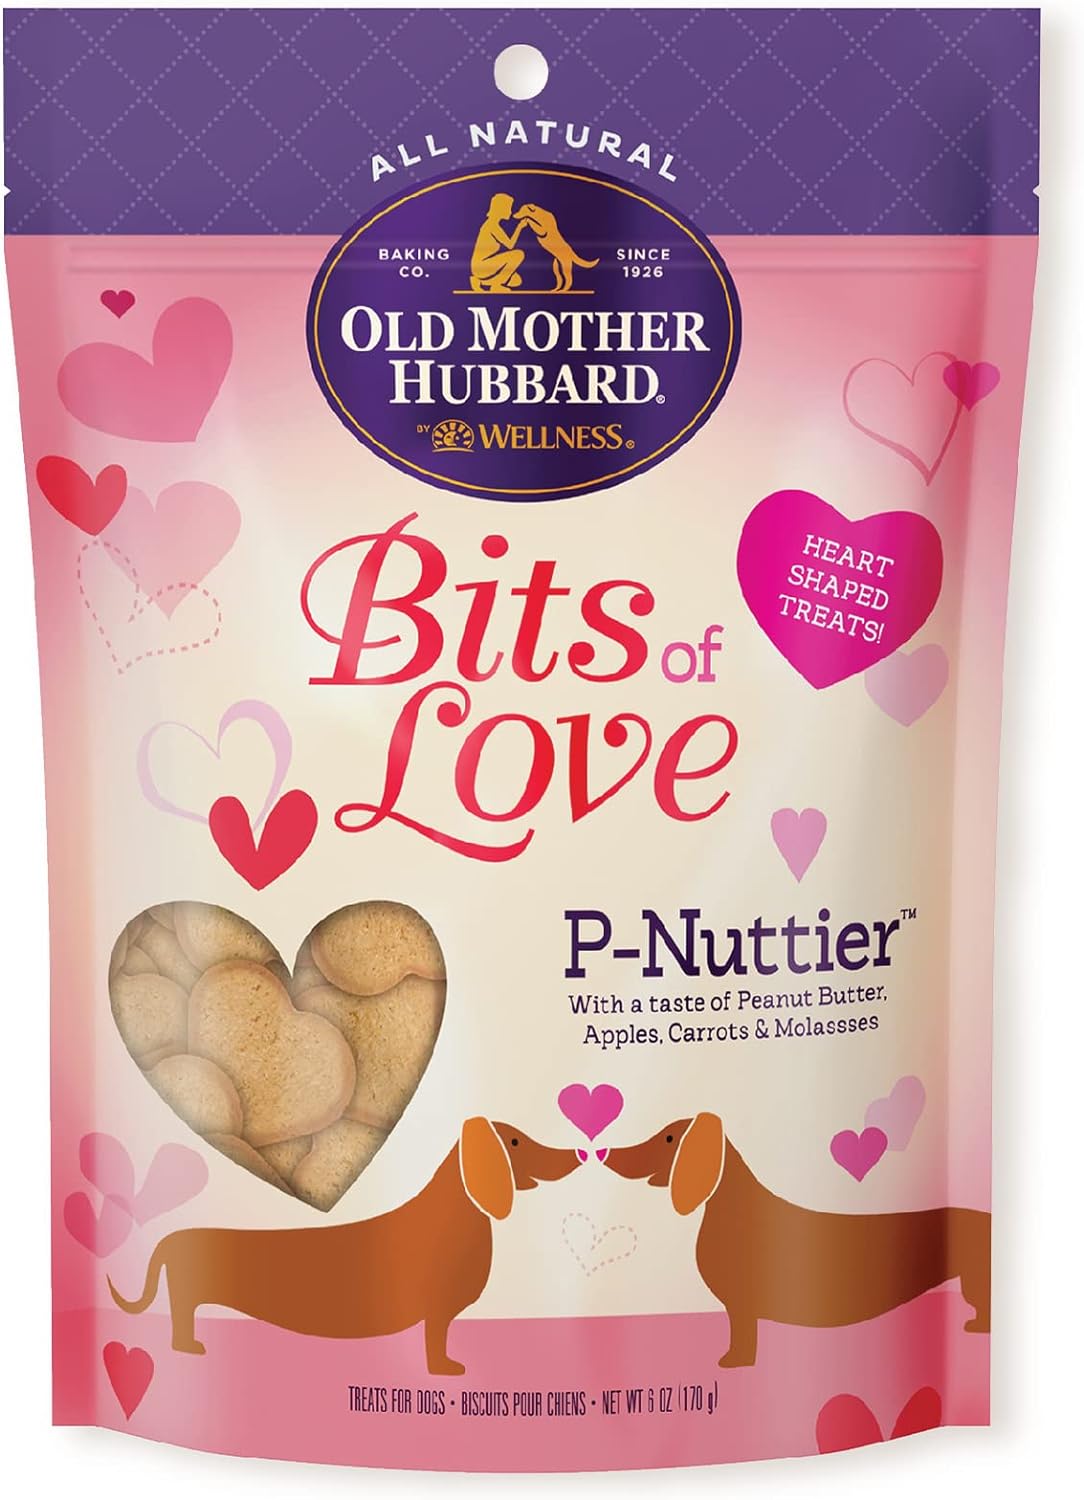 Old Mother Hubbard Natural Crunchy Dog Biscuits (Peanut Butter - Valentine's Day)